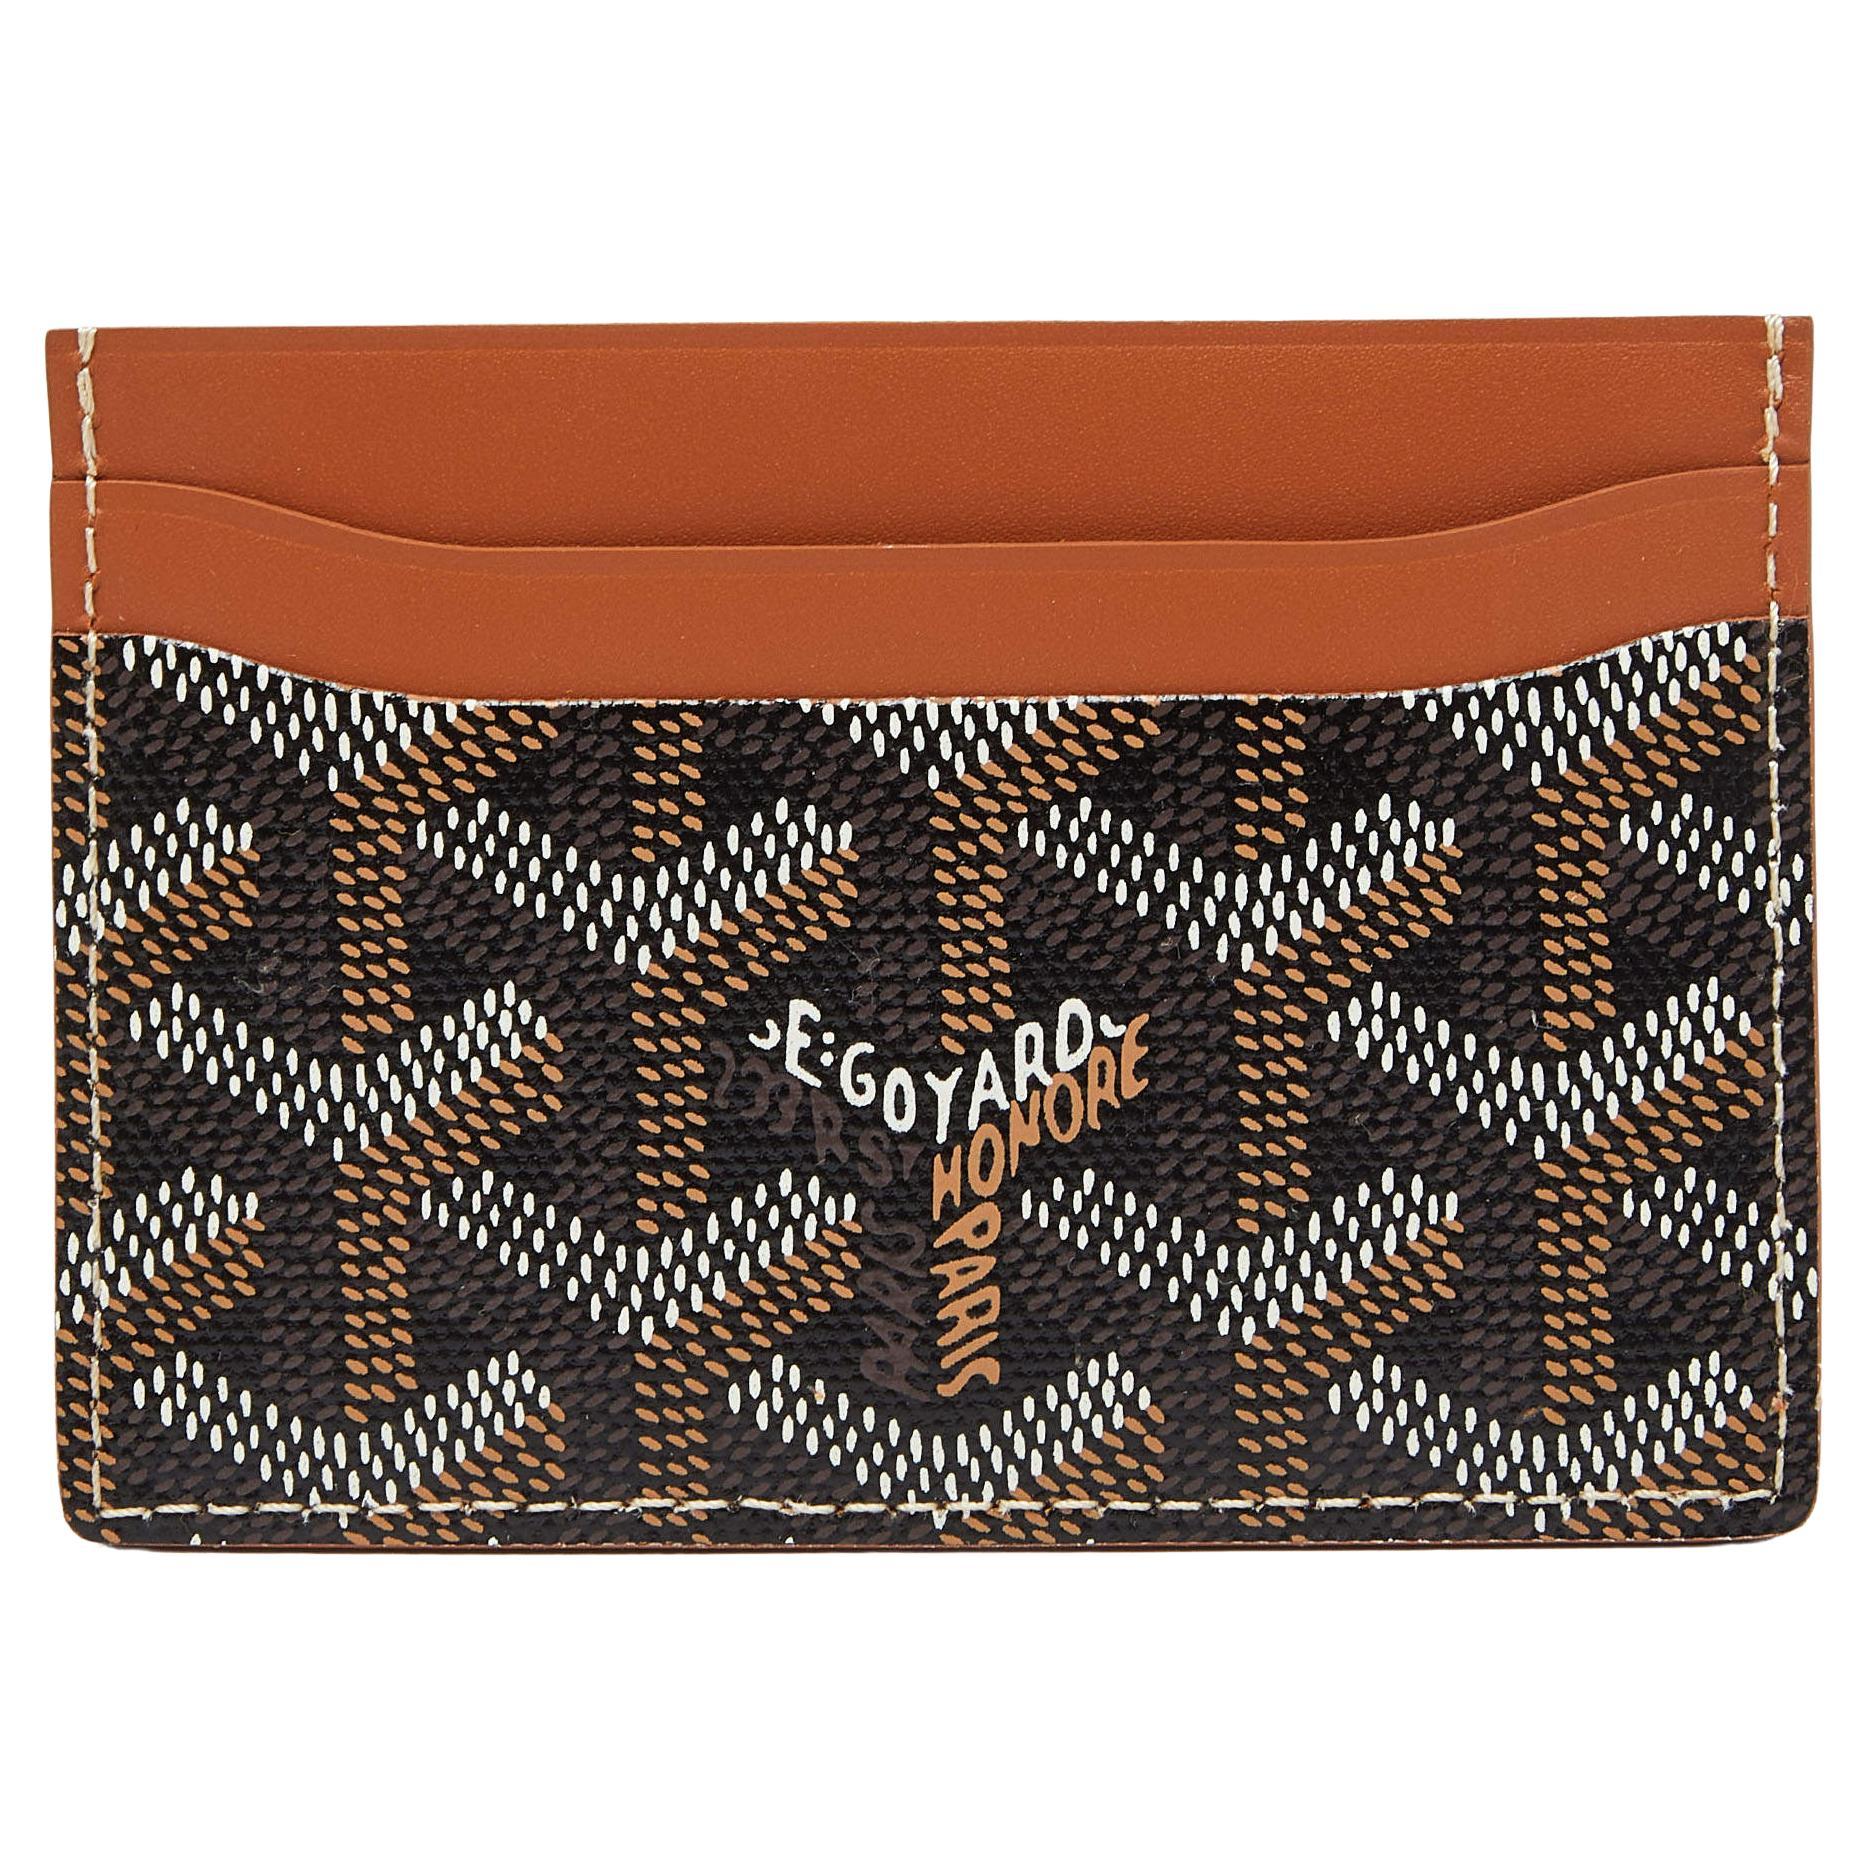 This Saint Sulpice cardholder from Goyard is made from brown Goyardine coated canvas and leather on the exterior with a neatly-lined leather interior. The creation is sleek and can be carried in your pocket or your handbag with ease.

Includes: